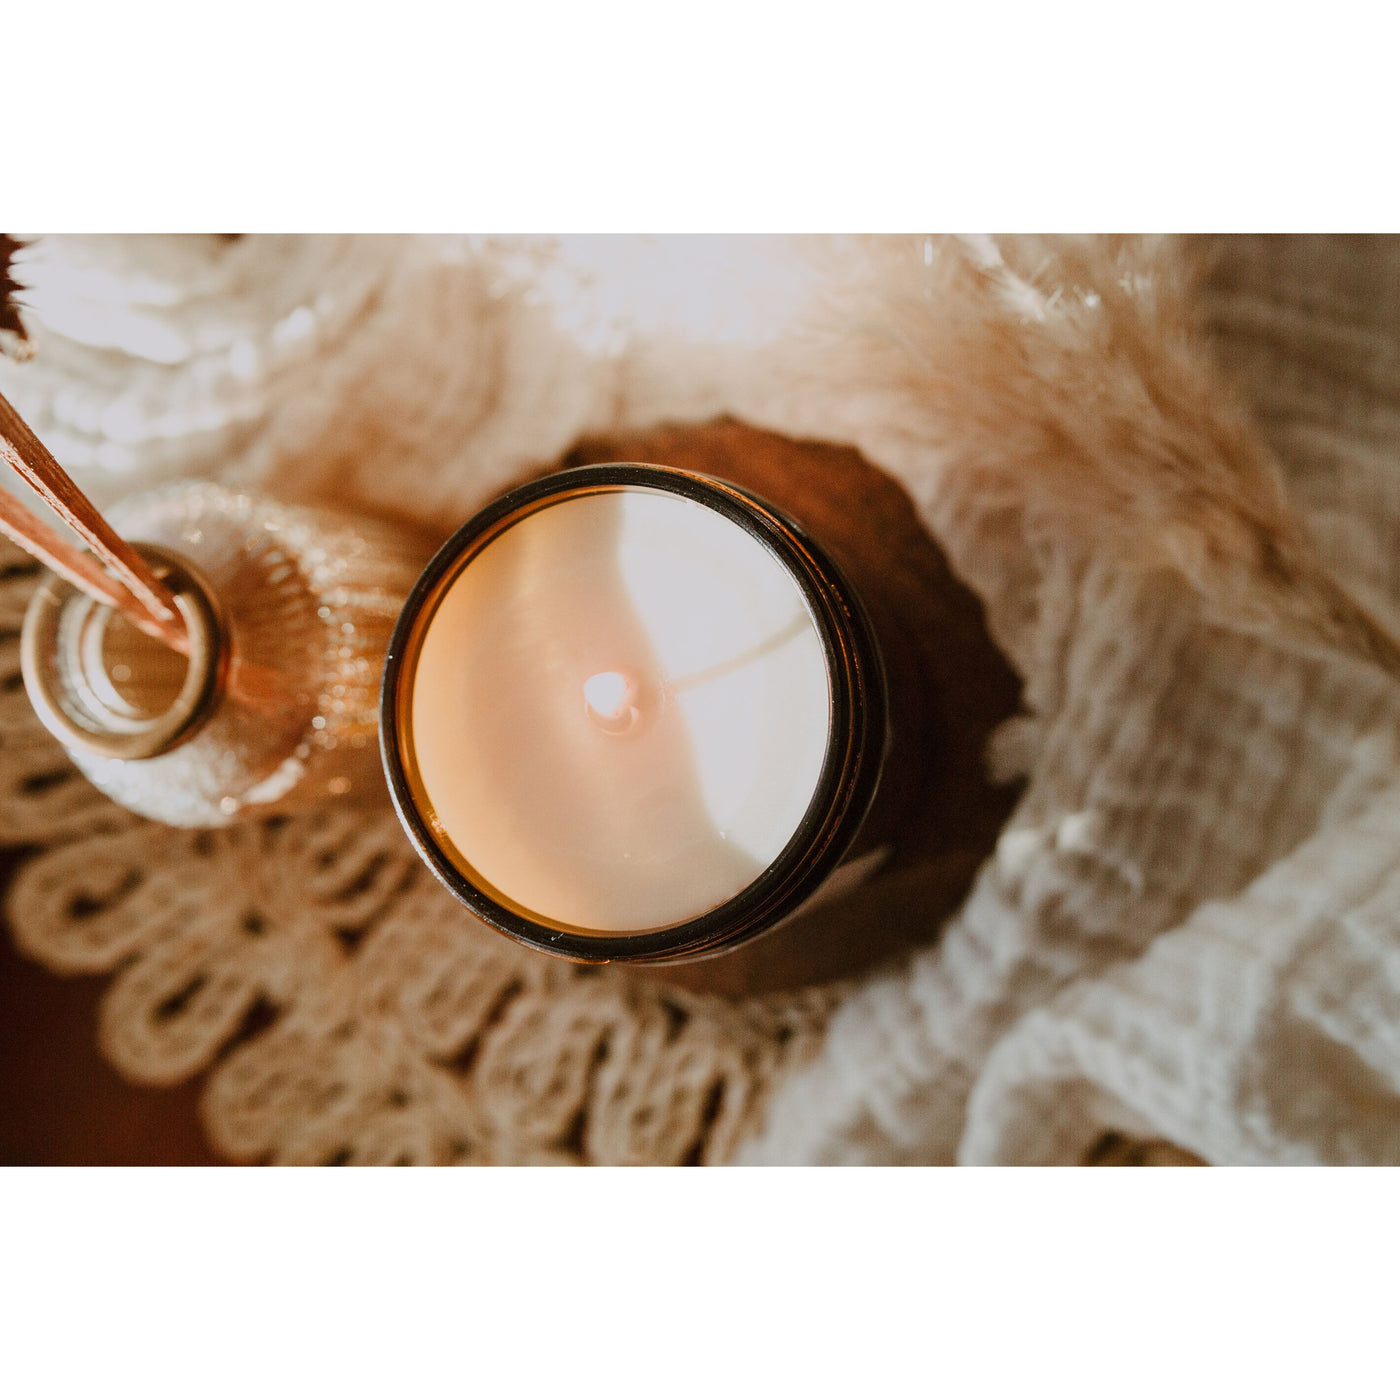 Incense & Amber - Scented Soy Candle - Almira Creations